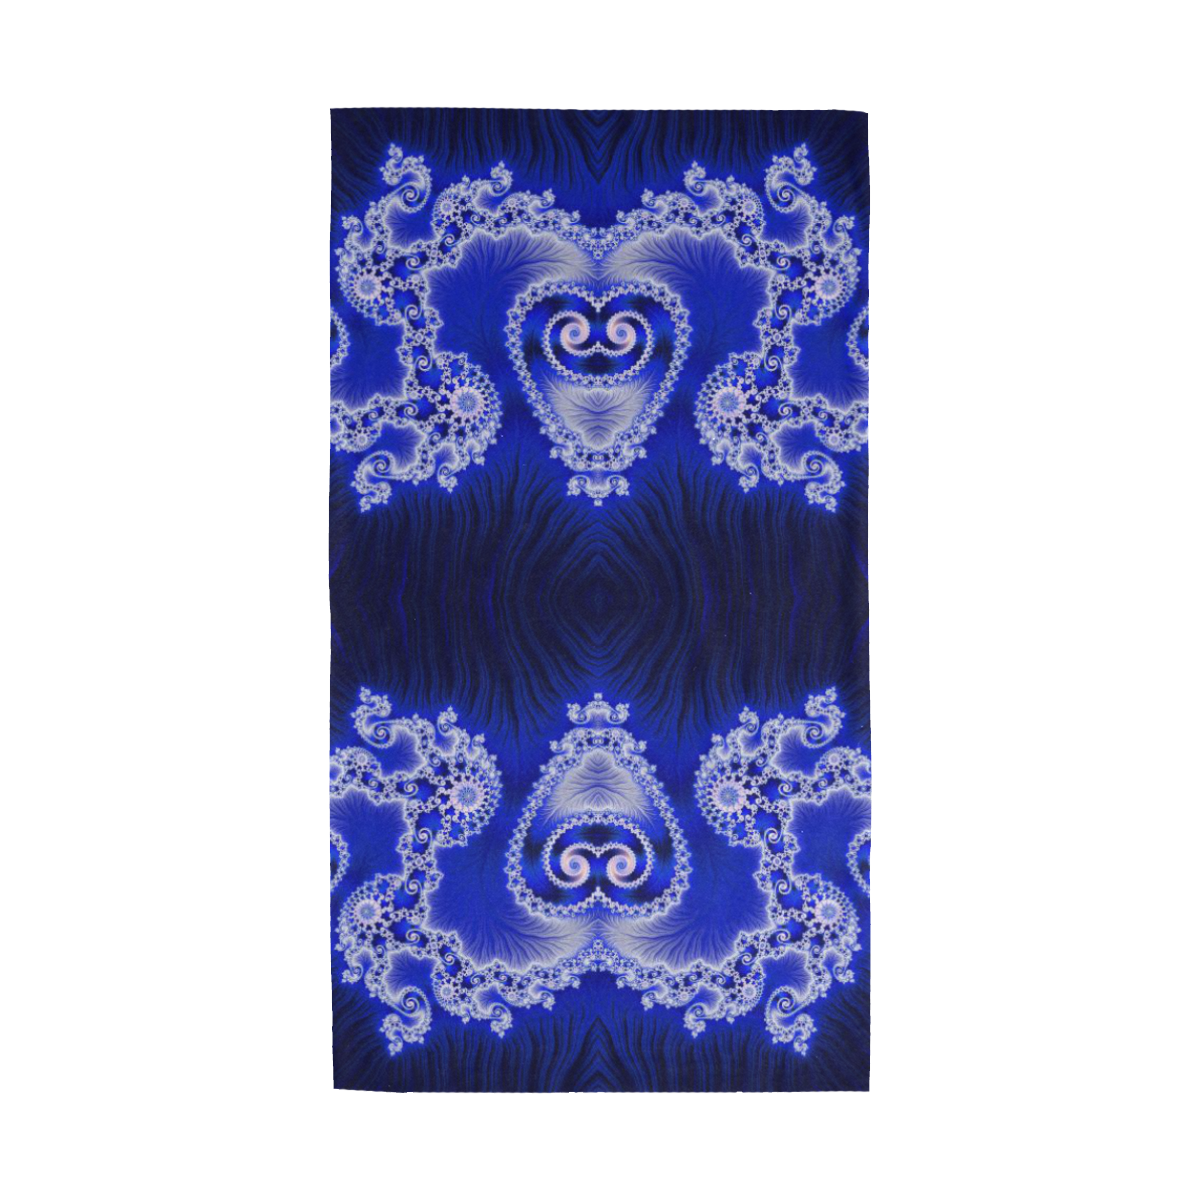 Blue and White Hearts  Lace Fractal Abstract Multifunctional Headwear